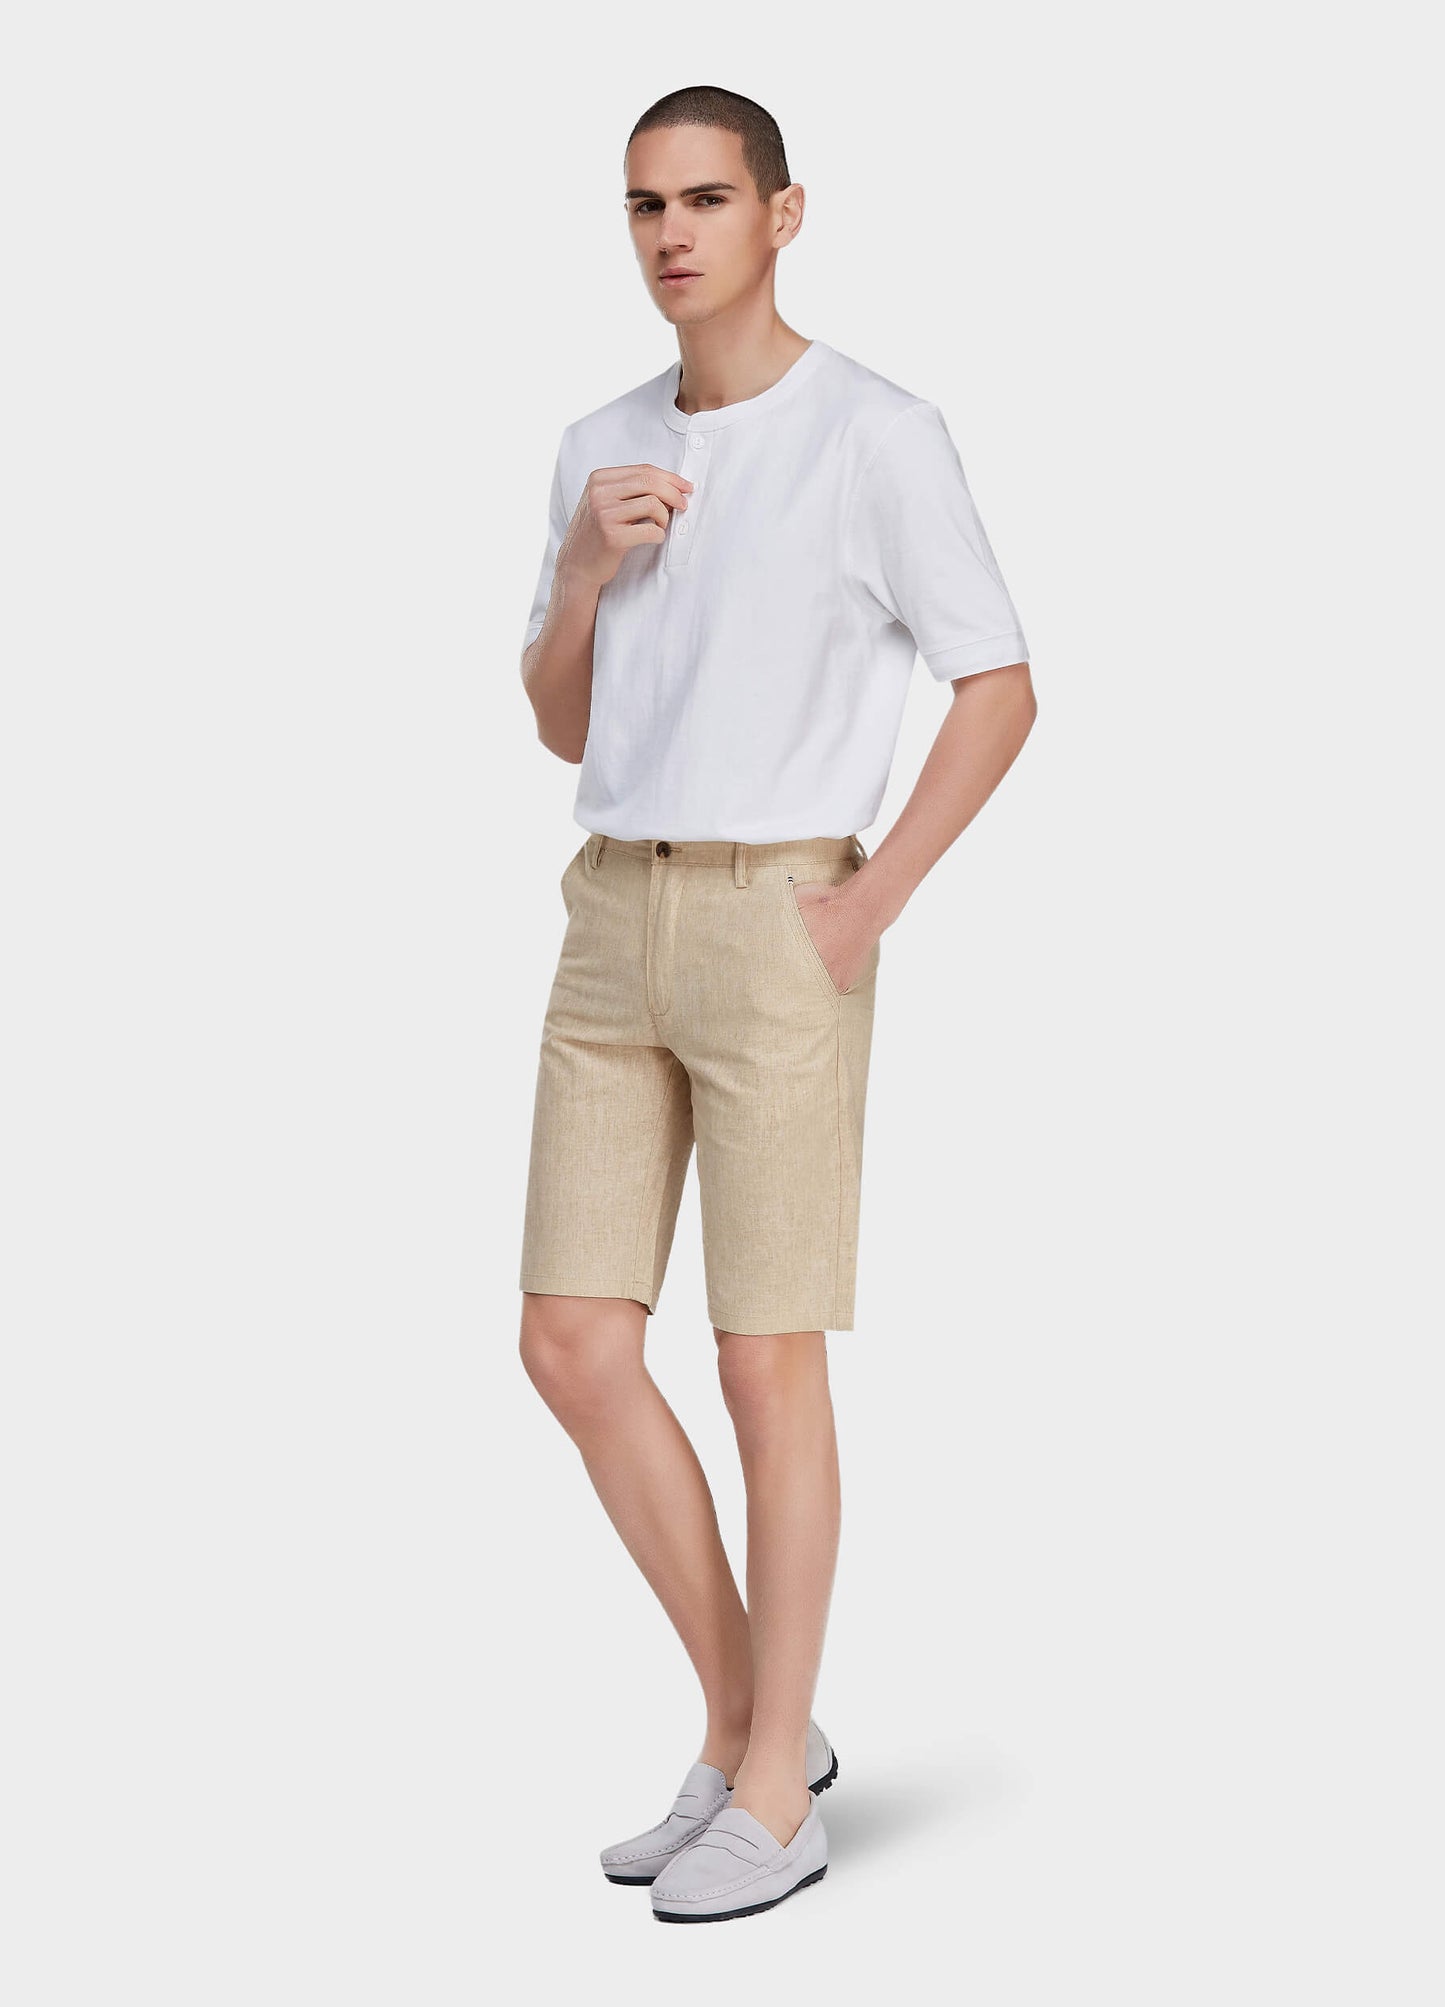 Men's Casual Solid Zipper Fly Button Walk Shorts with Slant Pockets-Beige side view